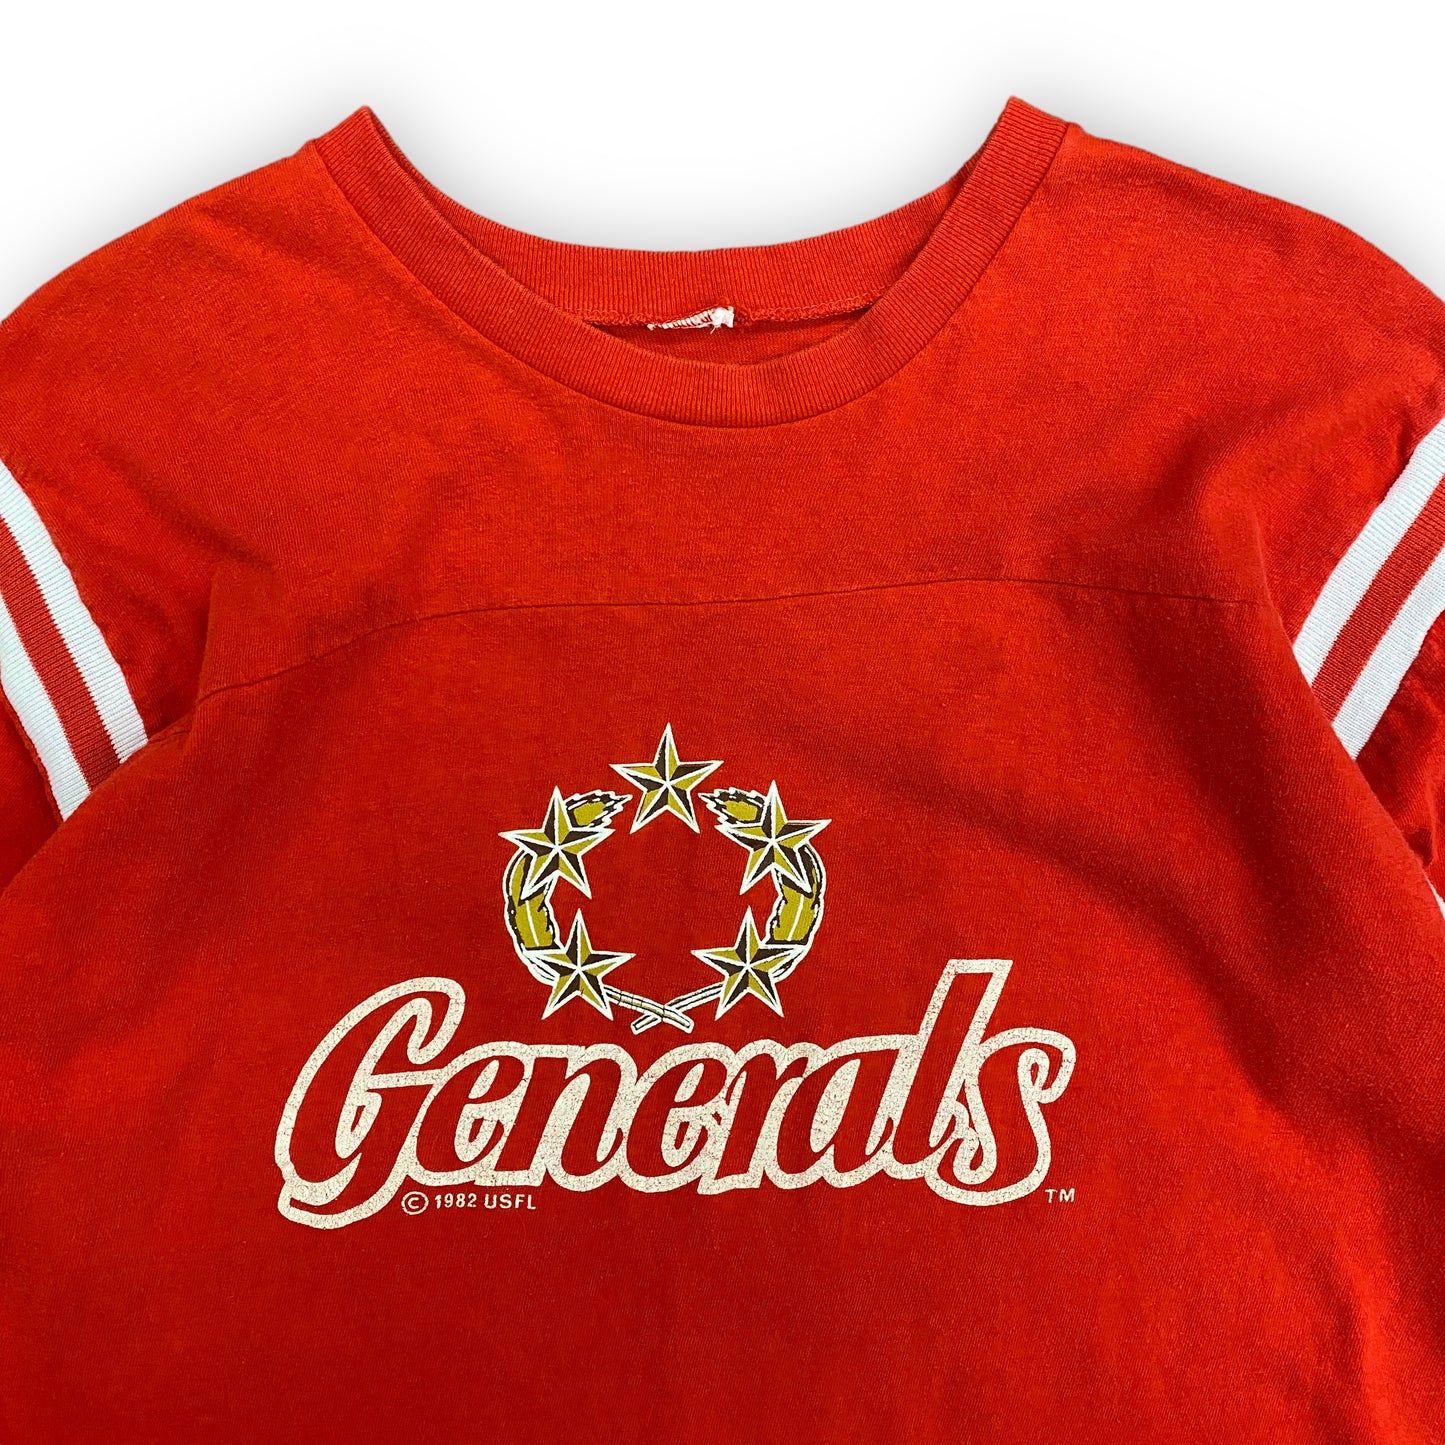 1980s Champion USFL New Jersey Generals Football Tee - Size Large